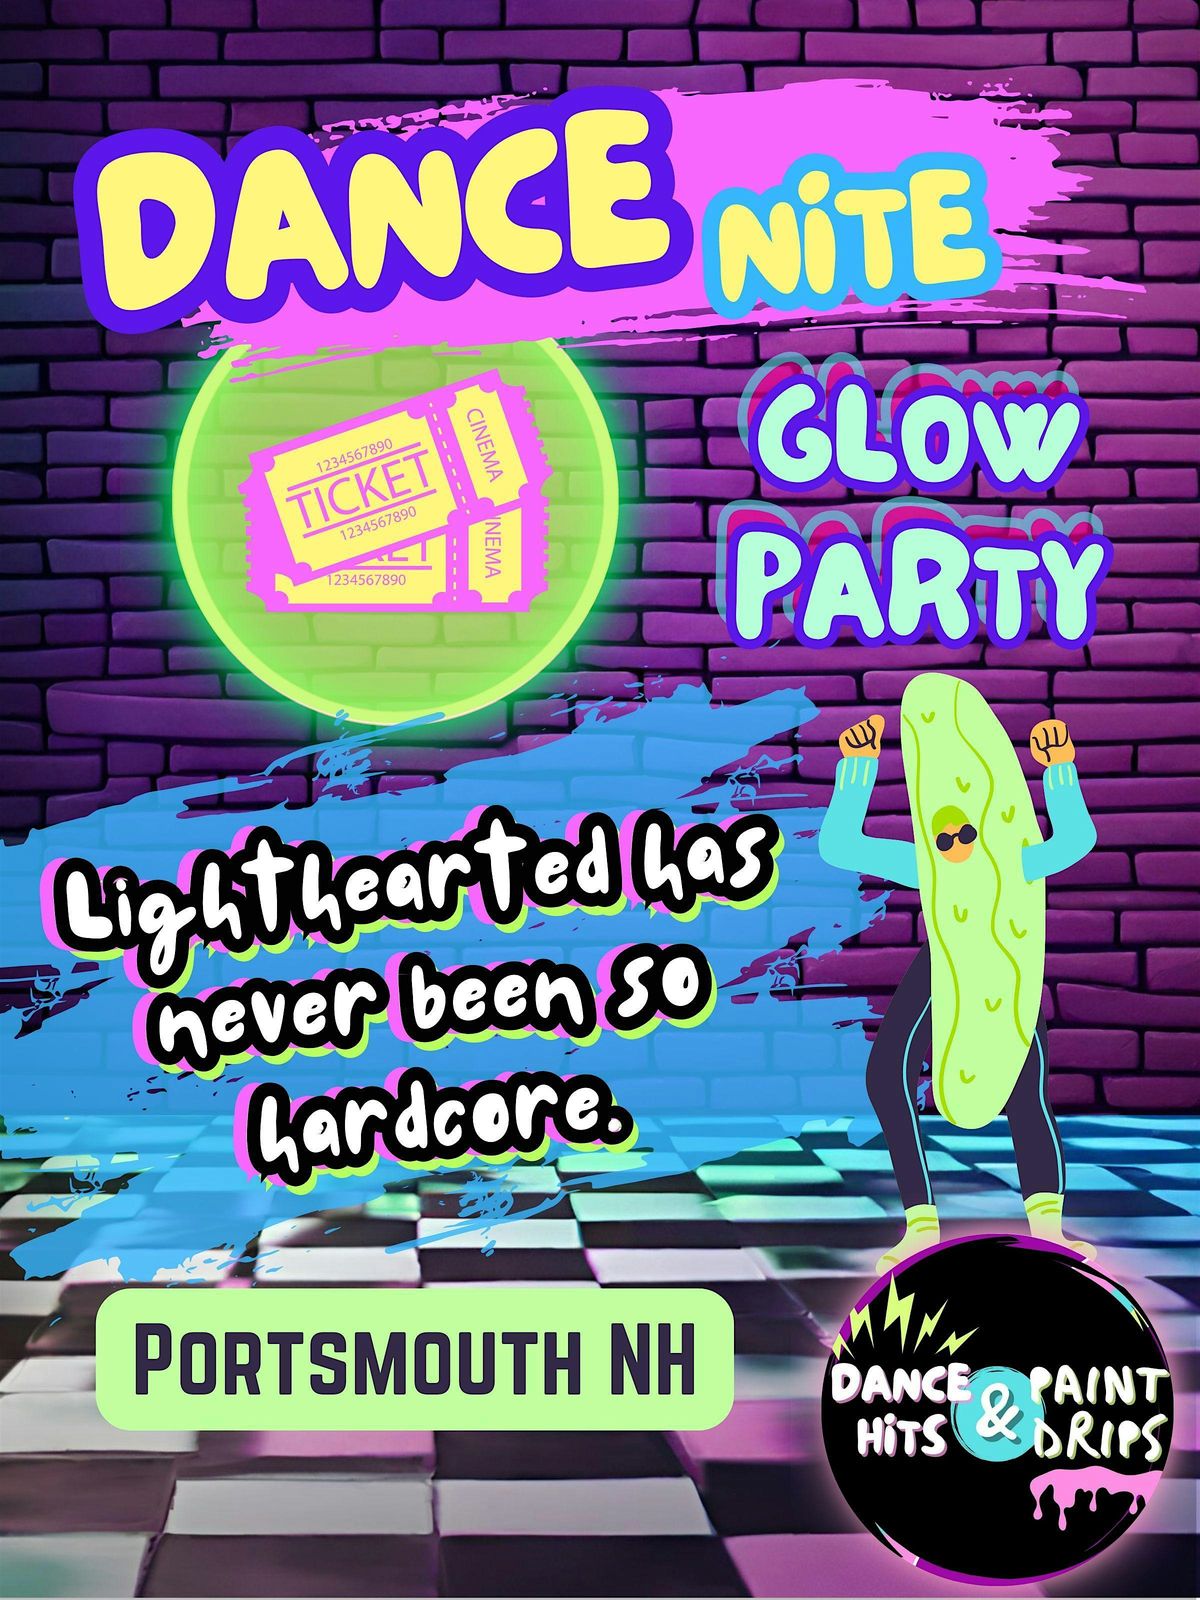 Dance Nite! A Fun-Filled Blacklight Glow Party in Portsmouth NH